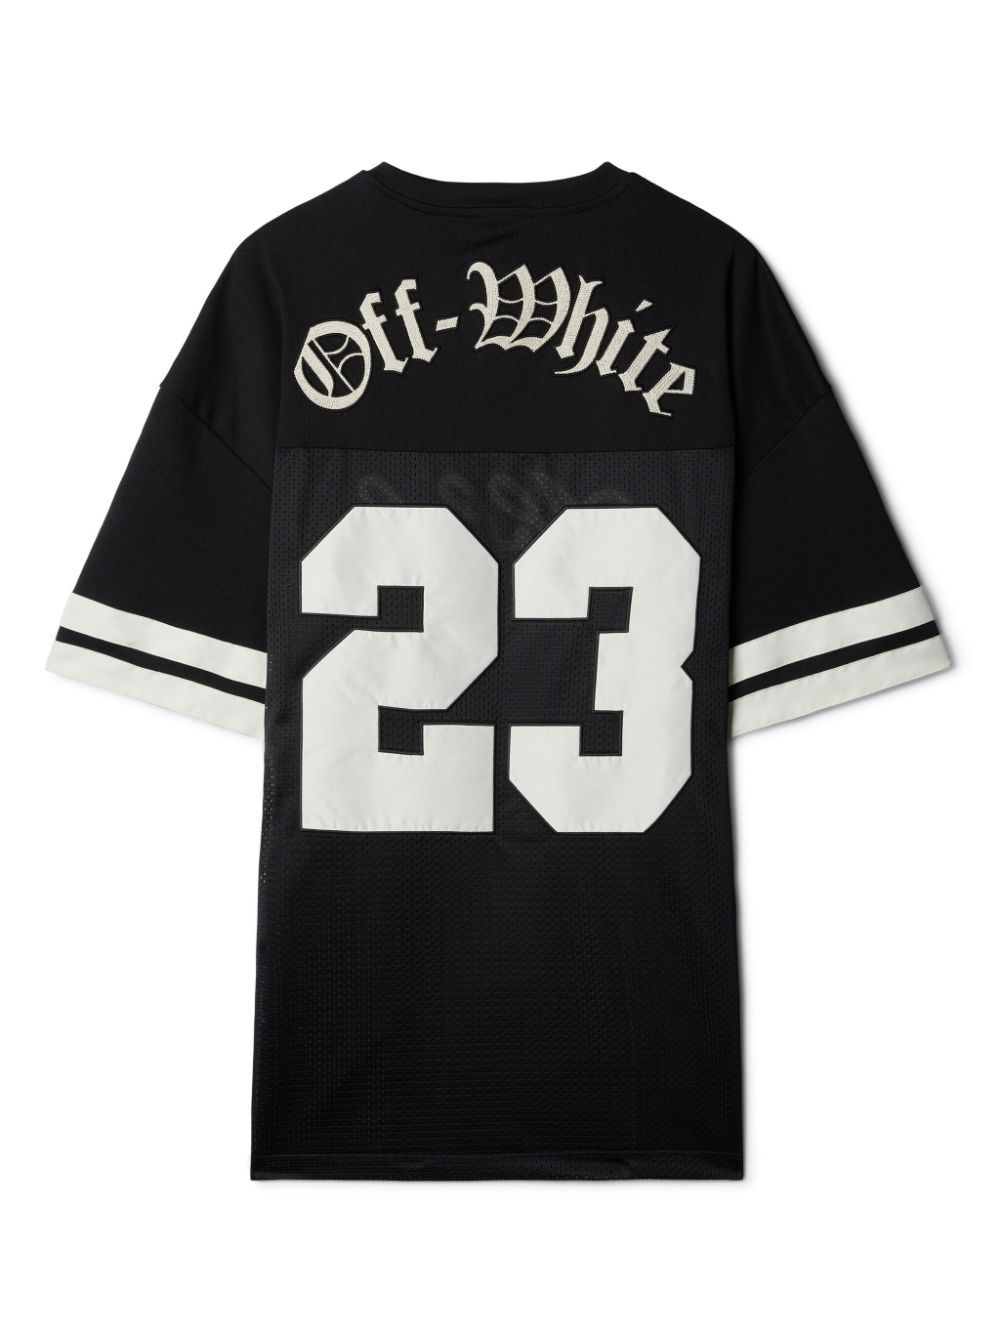 OFF-WHITE Black Football Mesh T-Shirt with Caravaggio Print for Men